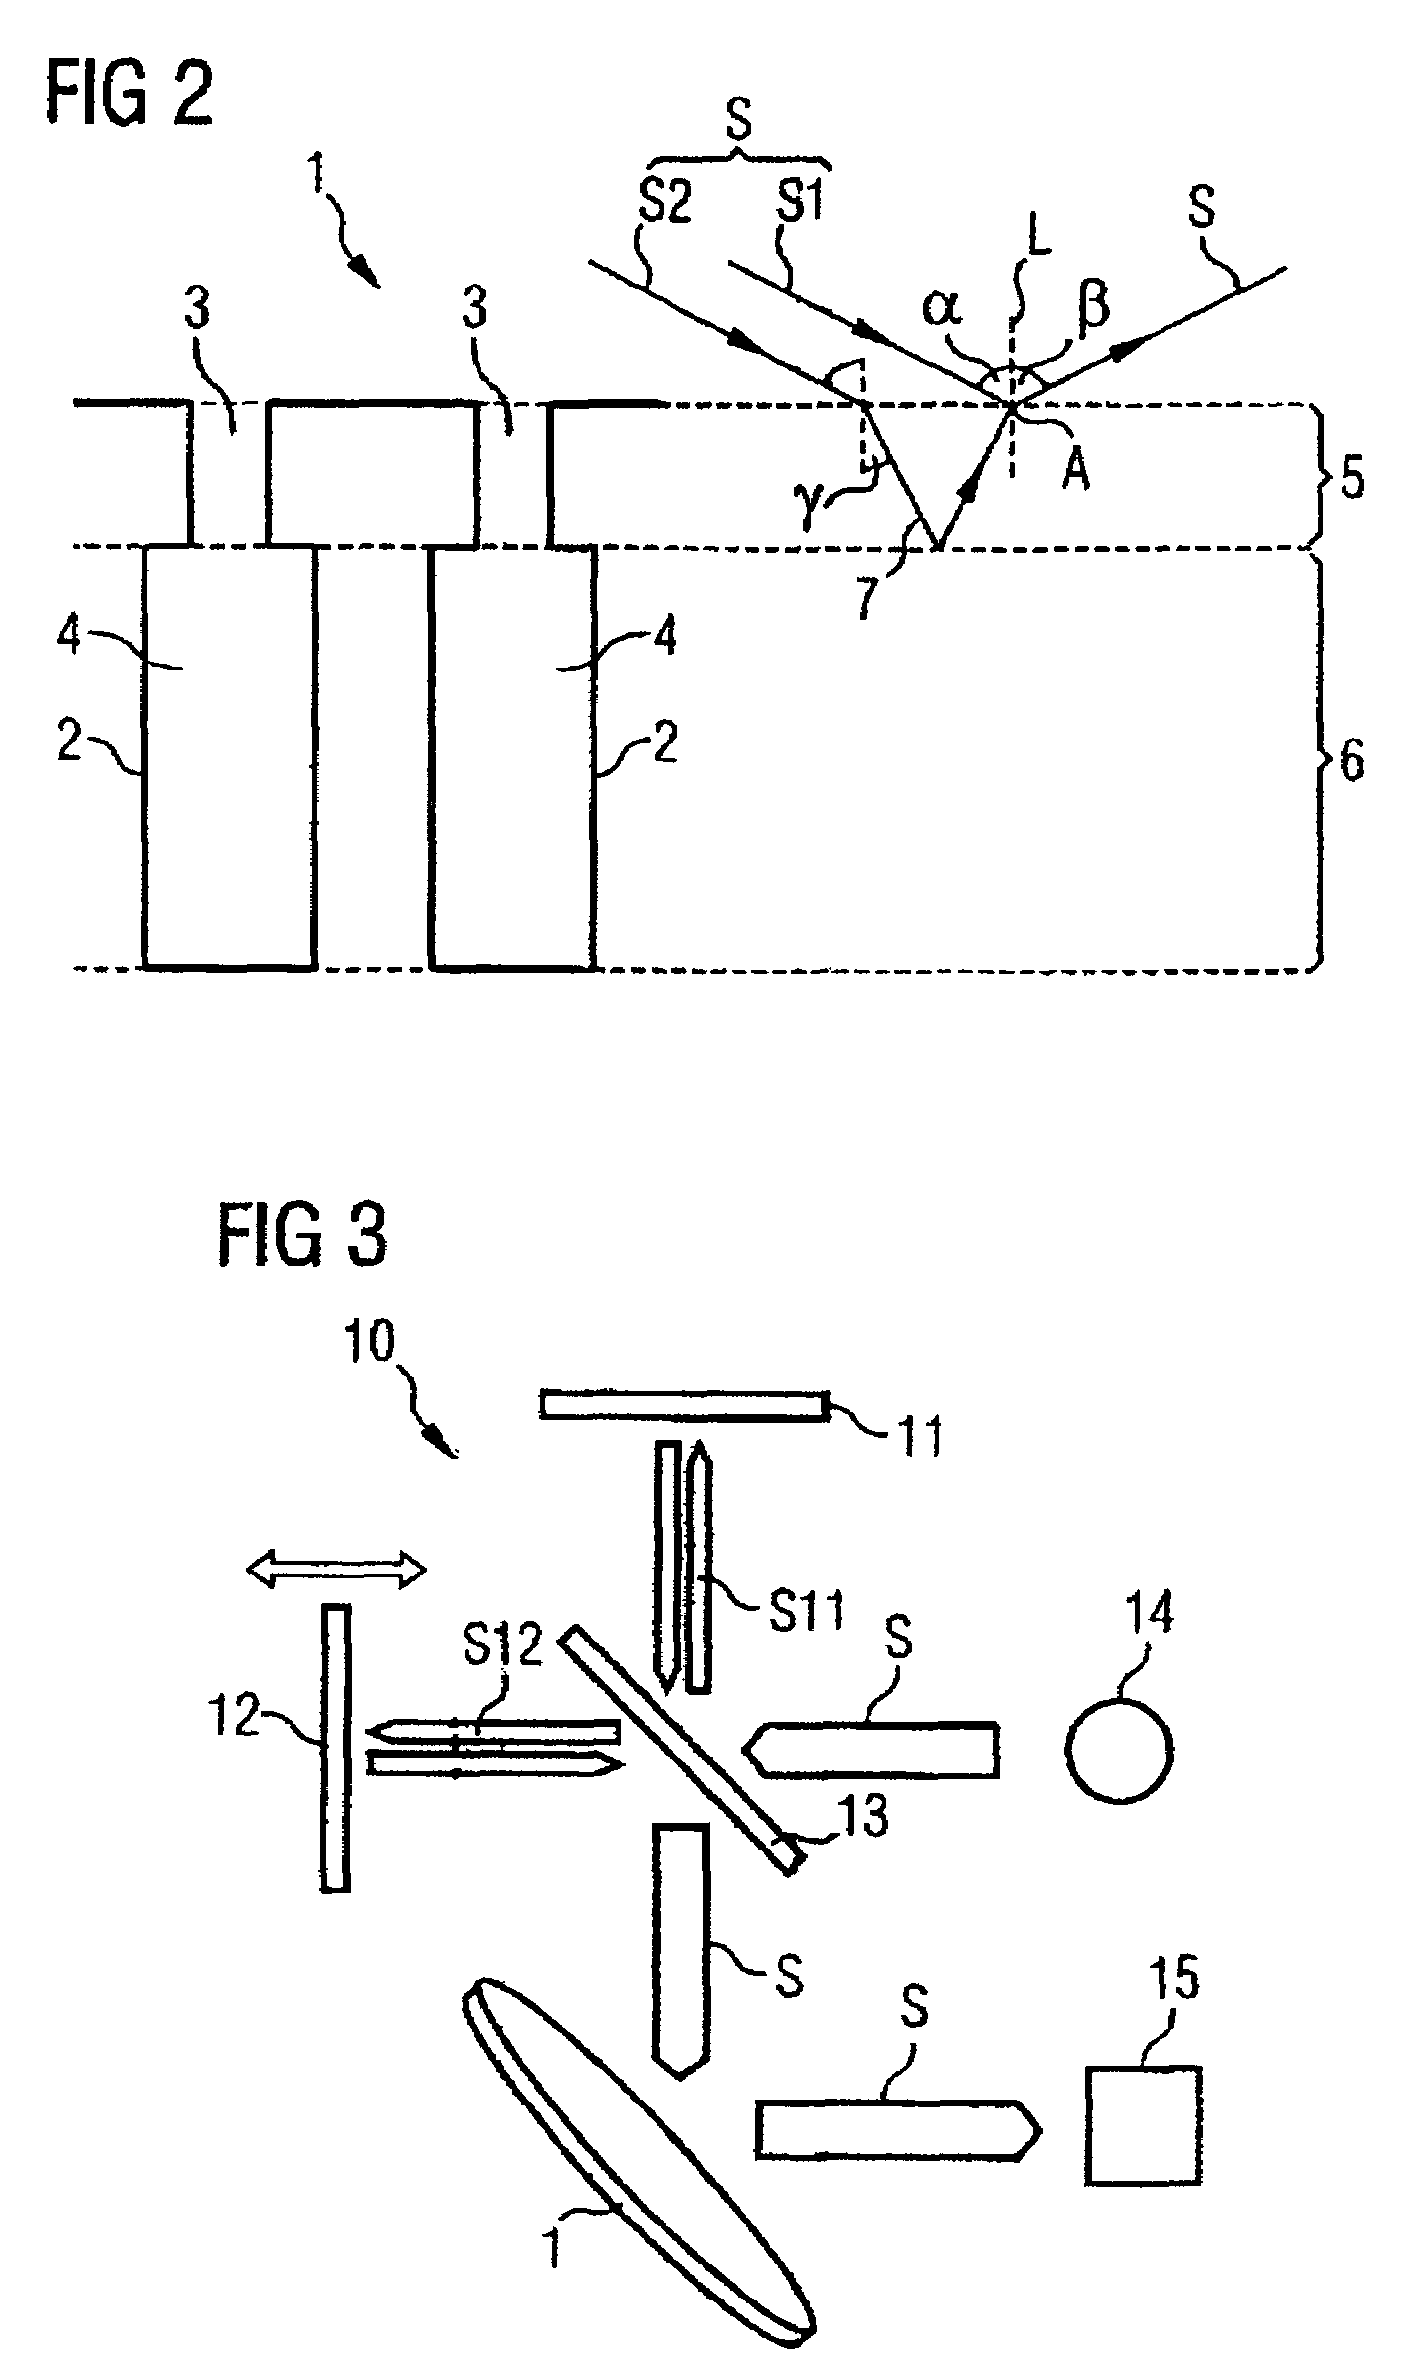 Method for determining the depth of a buried structure